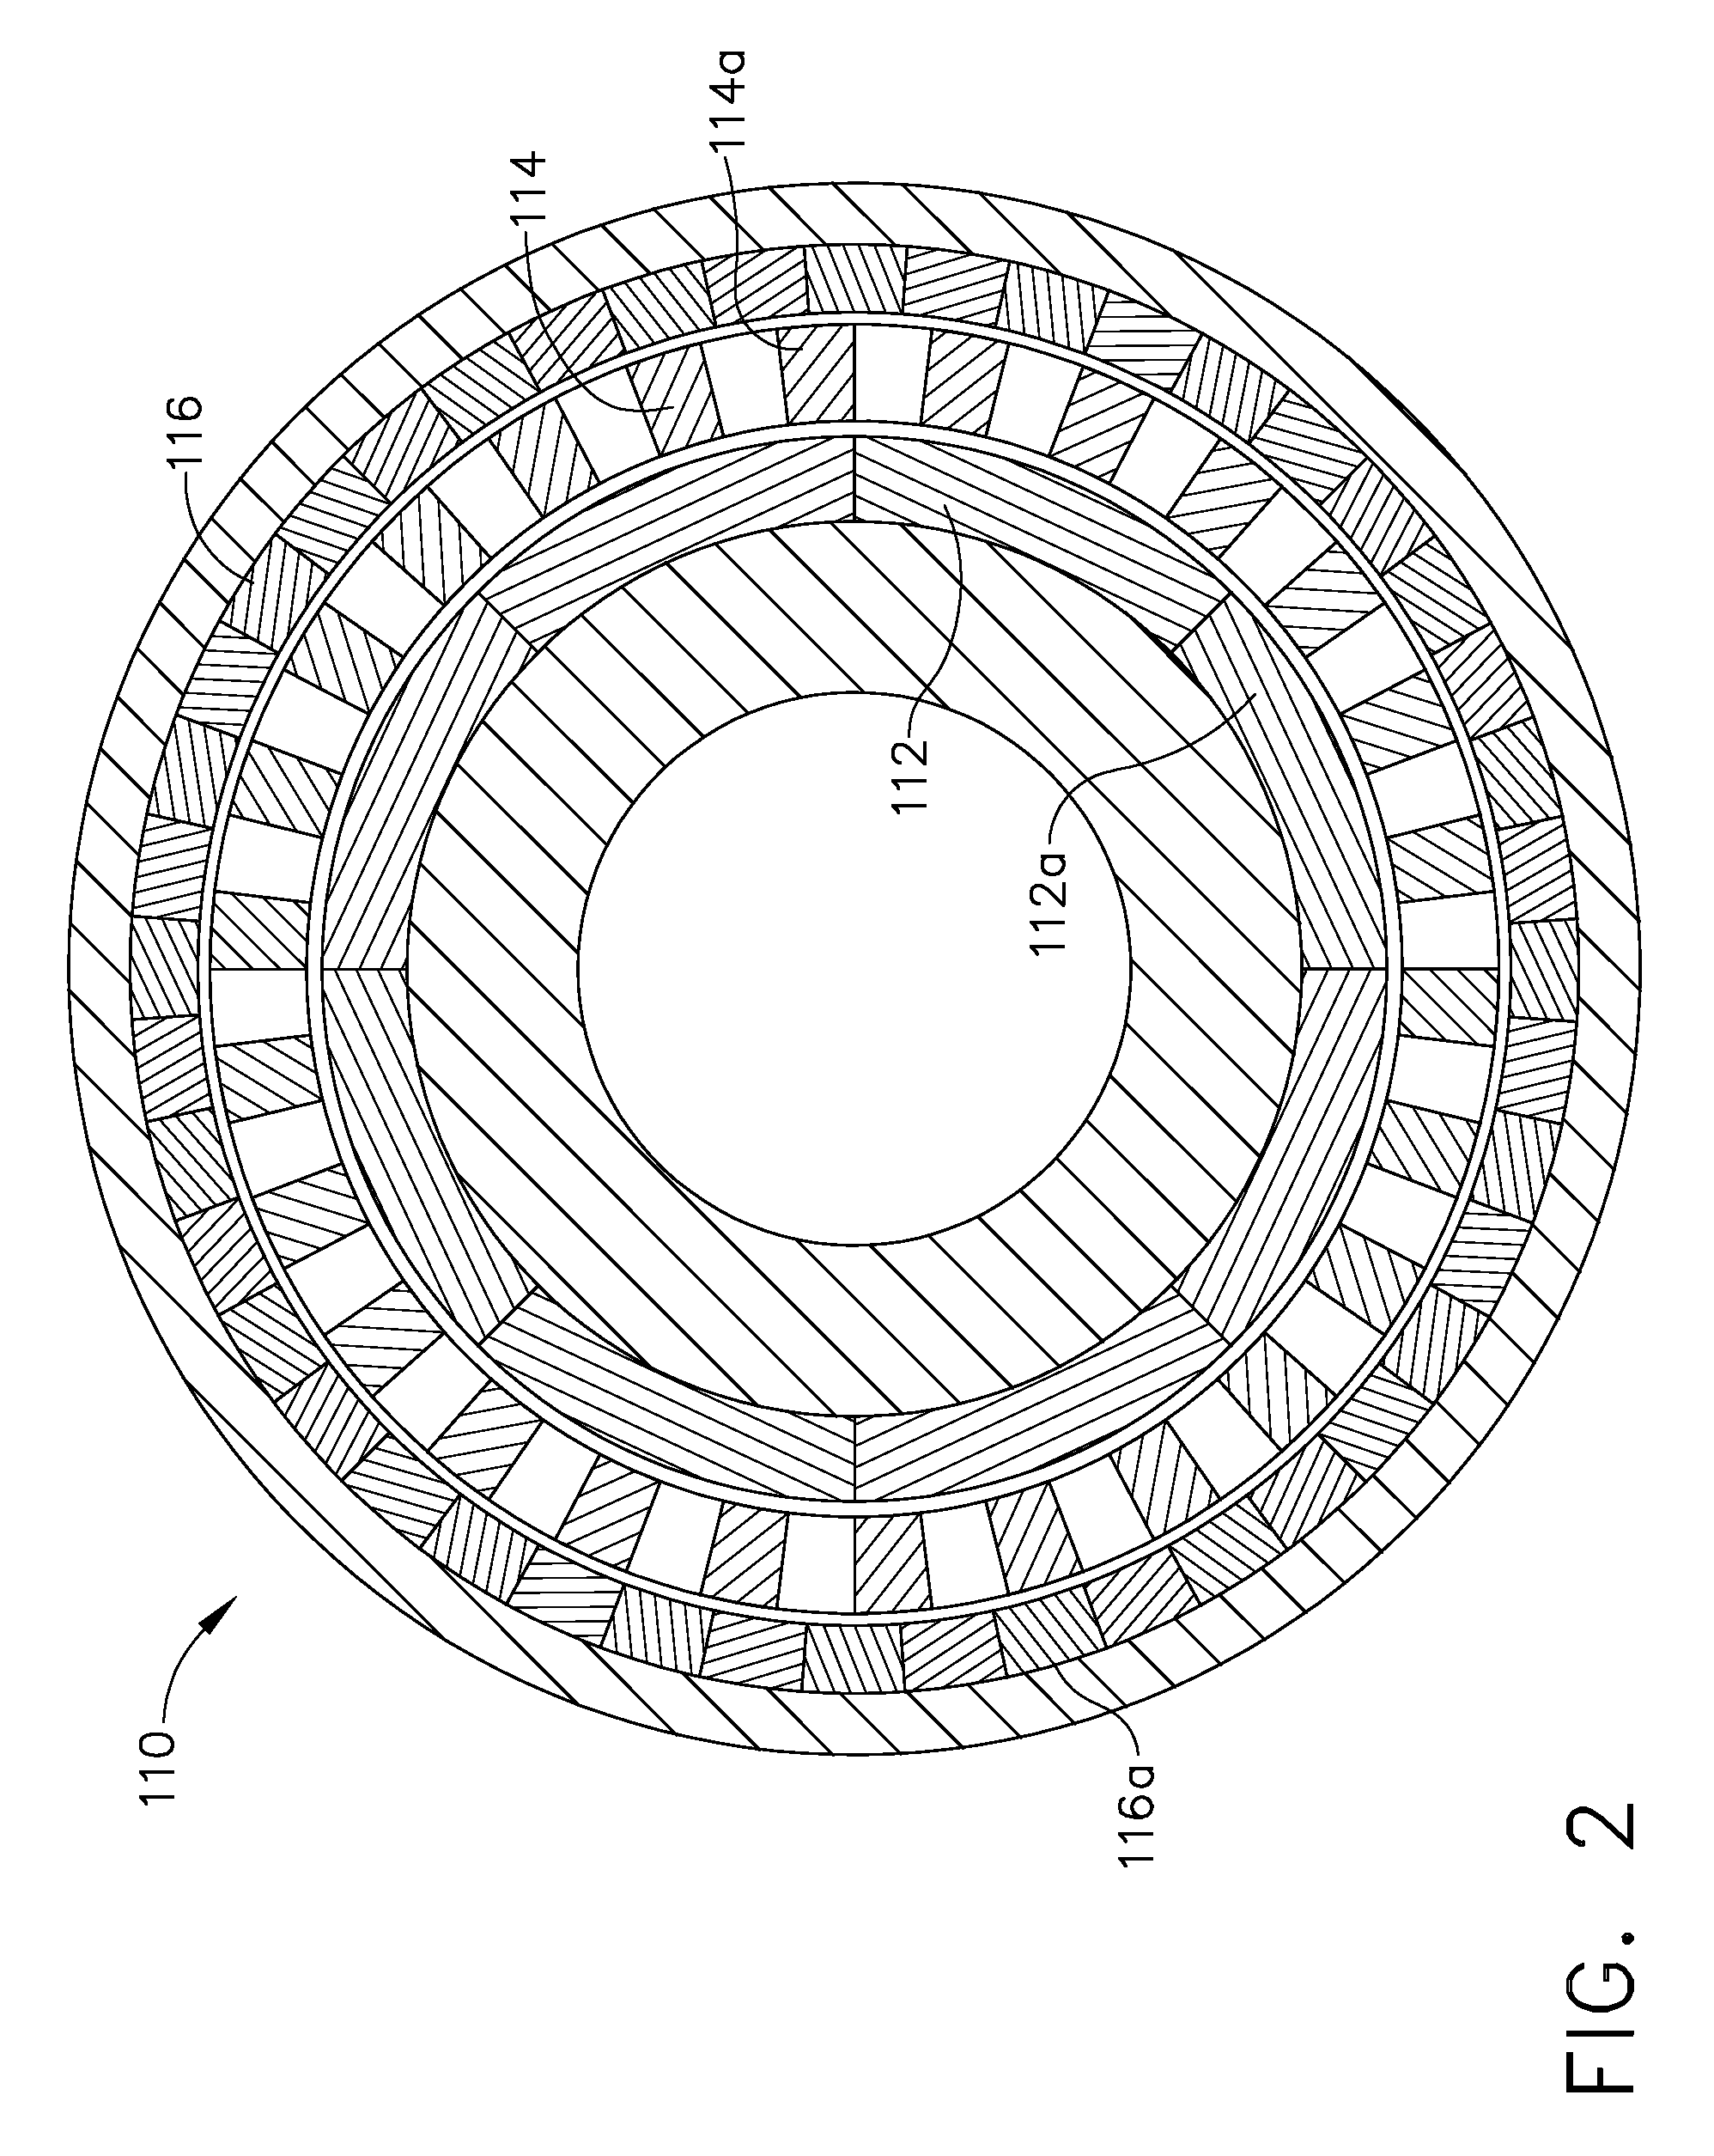 Variable Magnetic Coupling of Rotating Machinery